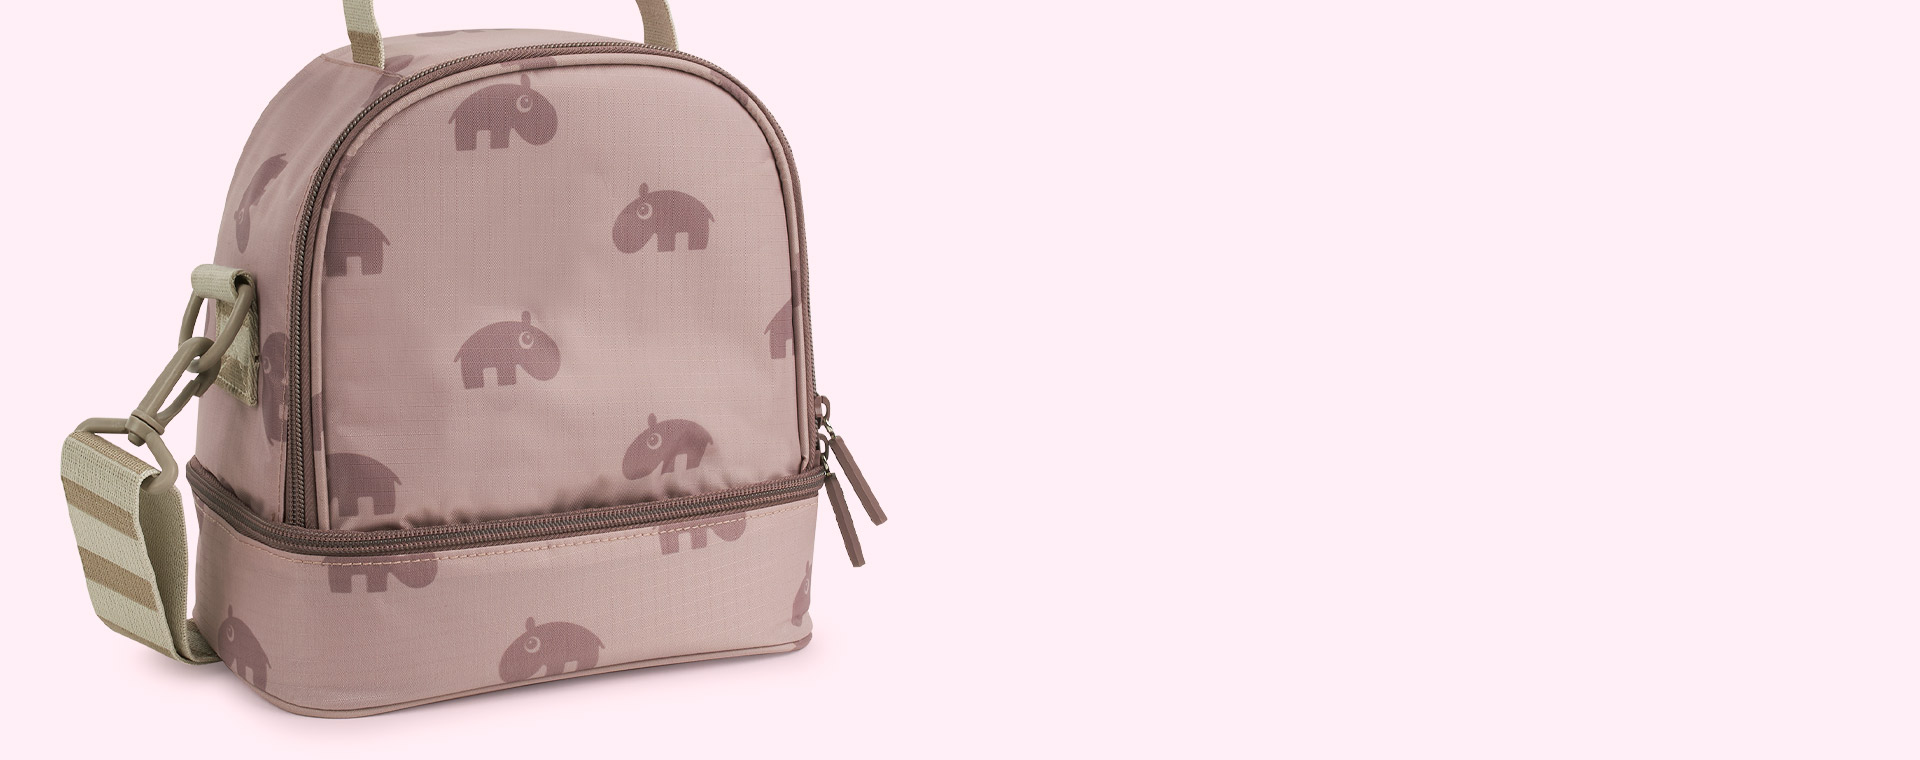 https://kidlycatalogue.blob.core.windows.net/products/31089/product-images/pink-powder-ozzo-1/done-by-deer-kids-insulated-lunch-bag-pink-powder-ozzo-1920x760_02.jpg